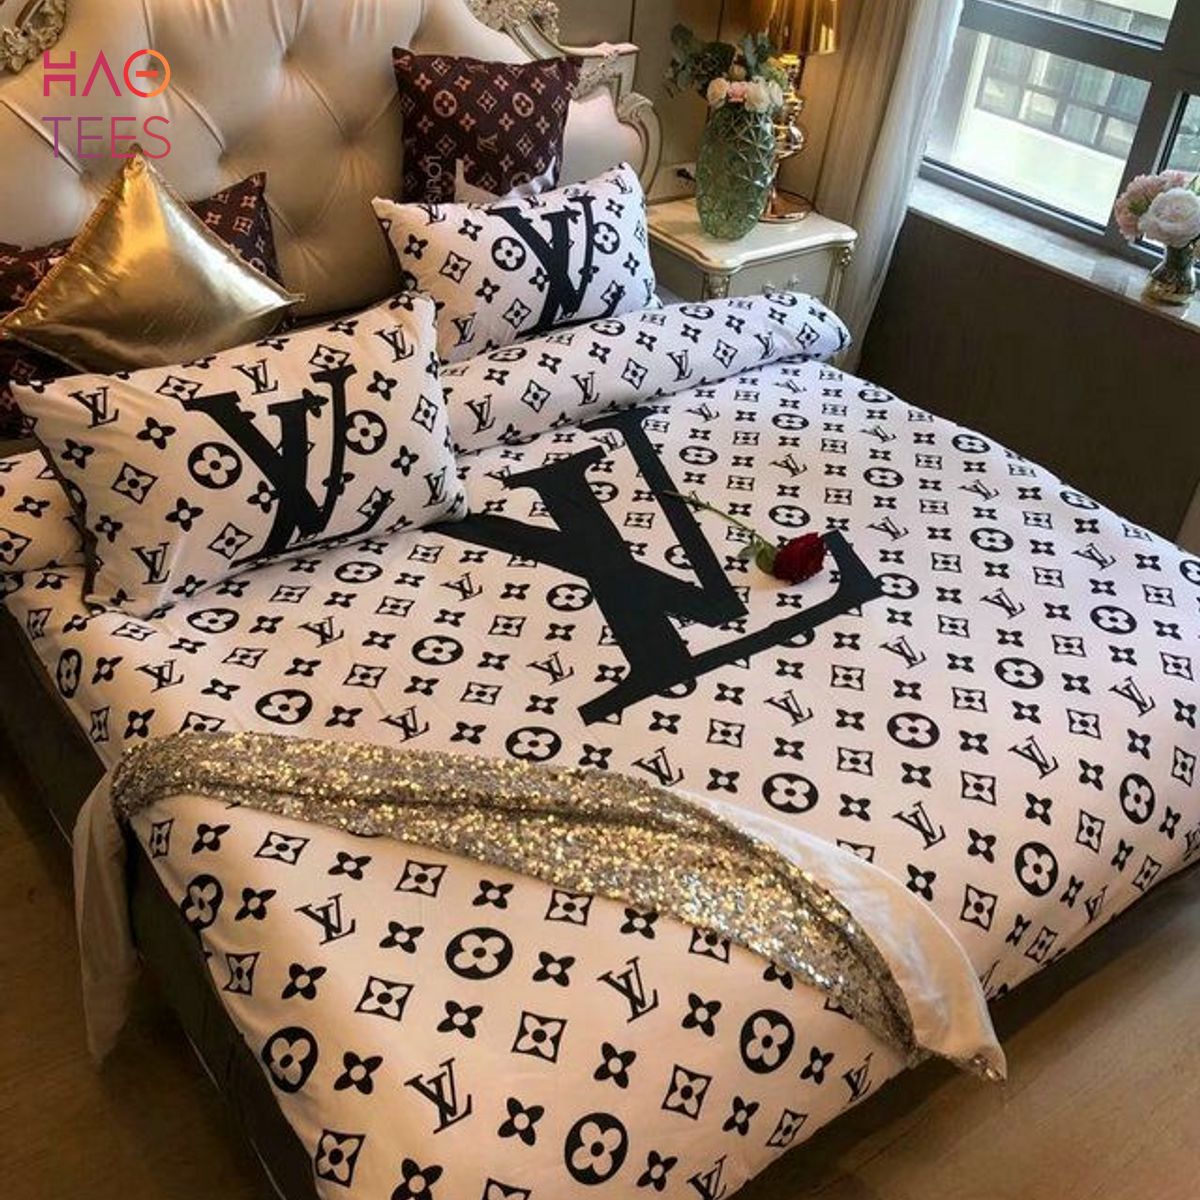 Louis Vuitton Supreme Hello Kitty Luxury Brand High-End Bedding Sets Lv  Bedroom Decor Thanksgiving Decorations For Home Best Luxury Bed Sets -  Ecomhao Store